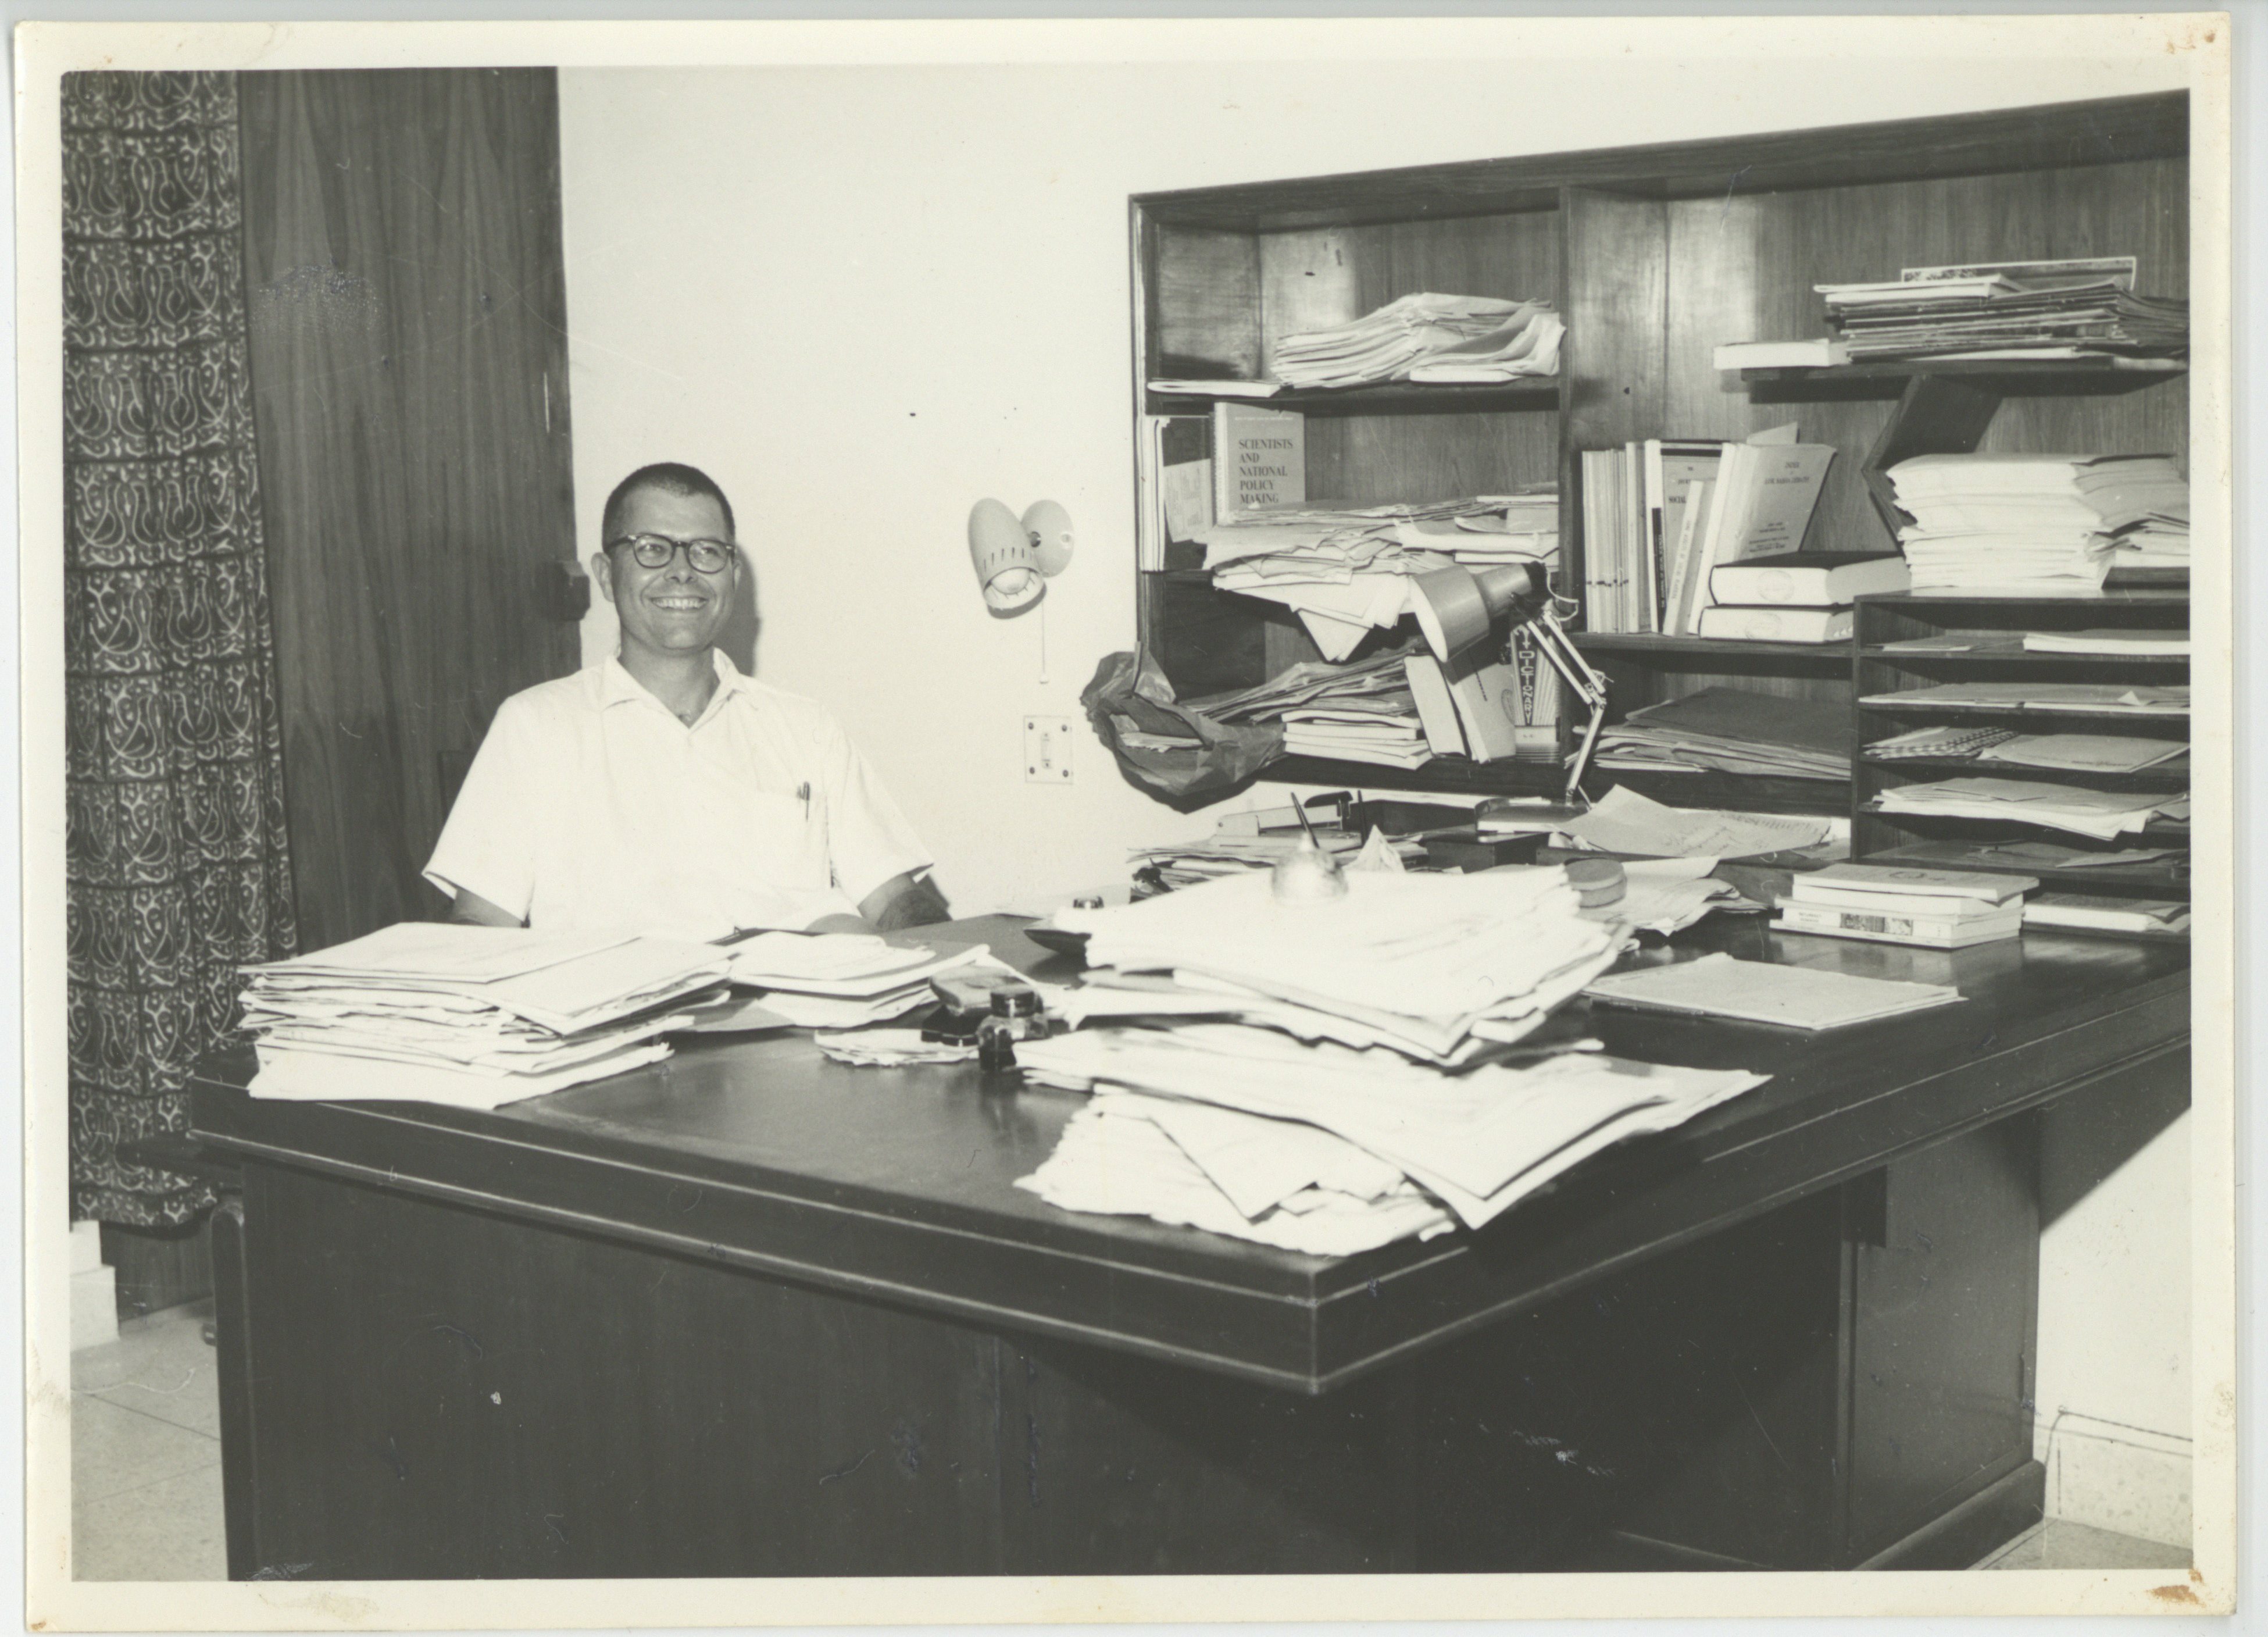 Depiction of Ward Morehouse at his desk in the Educational Resources Center, New Delhi, 1966